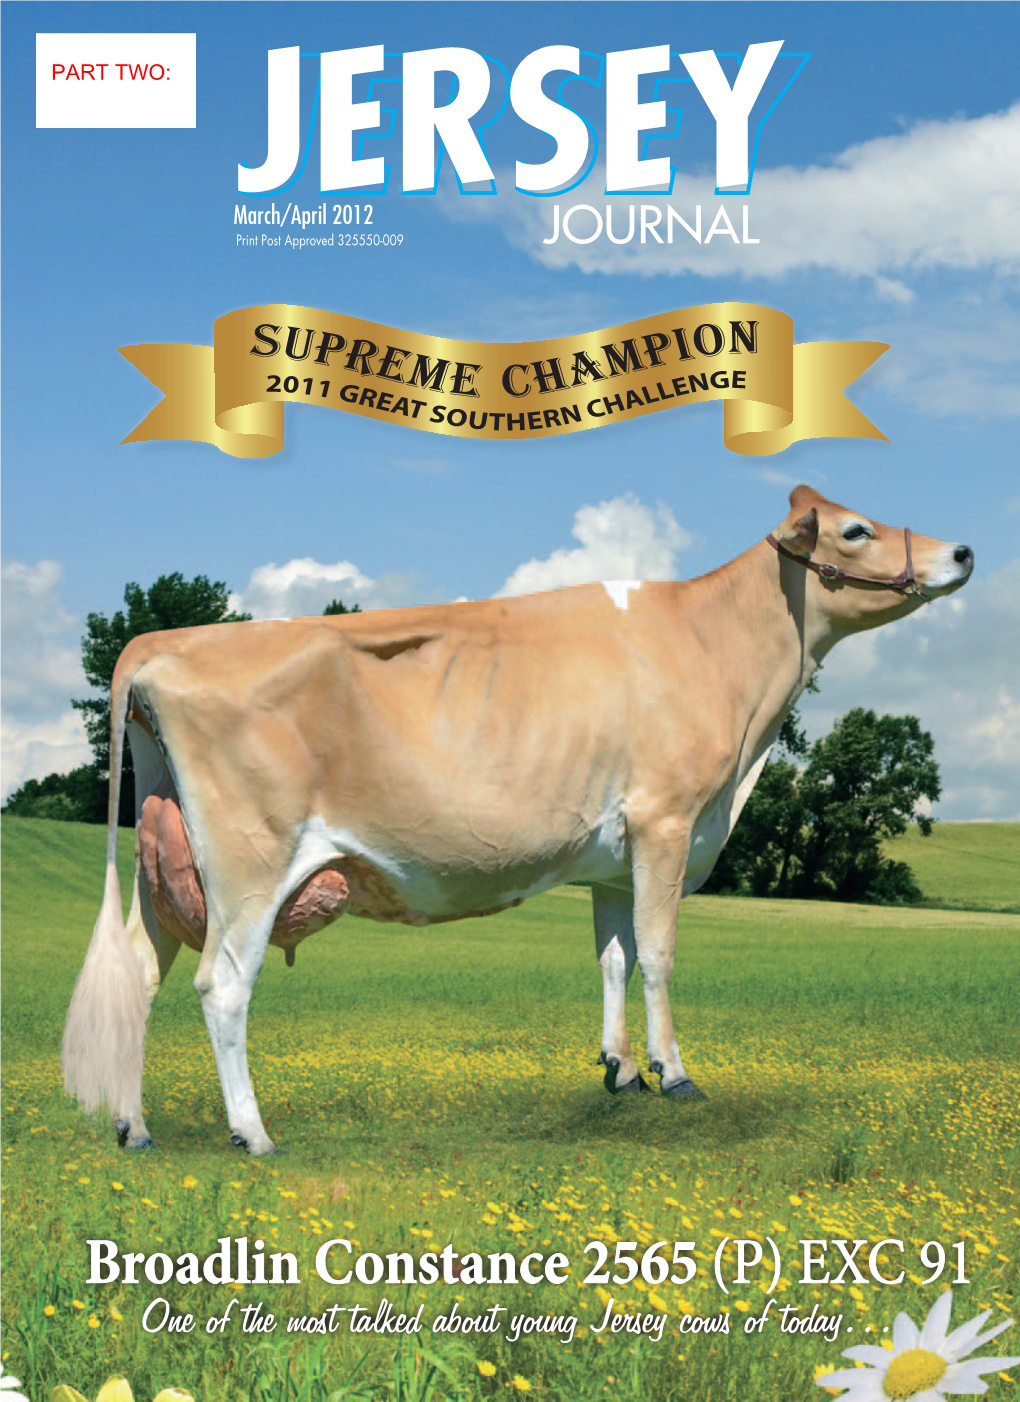 Broadlin Constance 2565 (P) EXC 91 One of the Most Talked About Young Jersey Cows of Today… South Gippsland Jersey Breeders Club 100 YEARS of Jerseyexcellence